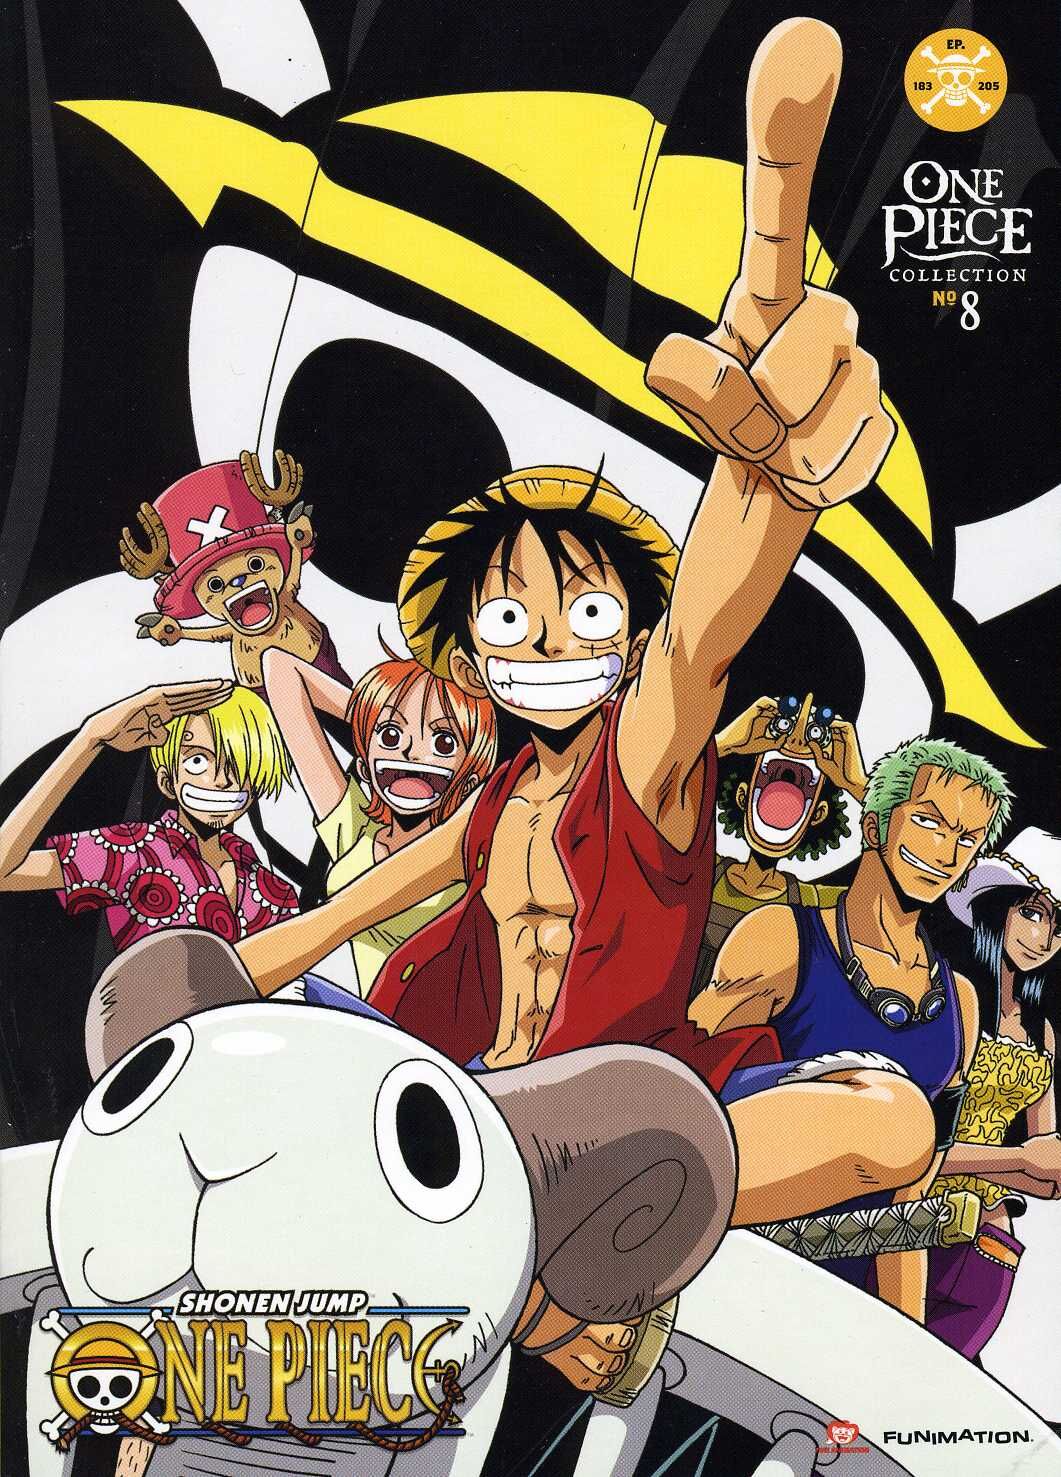 One Piece Episodes 965976 English Dub Release Date onepiece luffy wano   YouTube